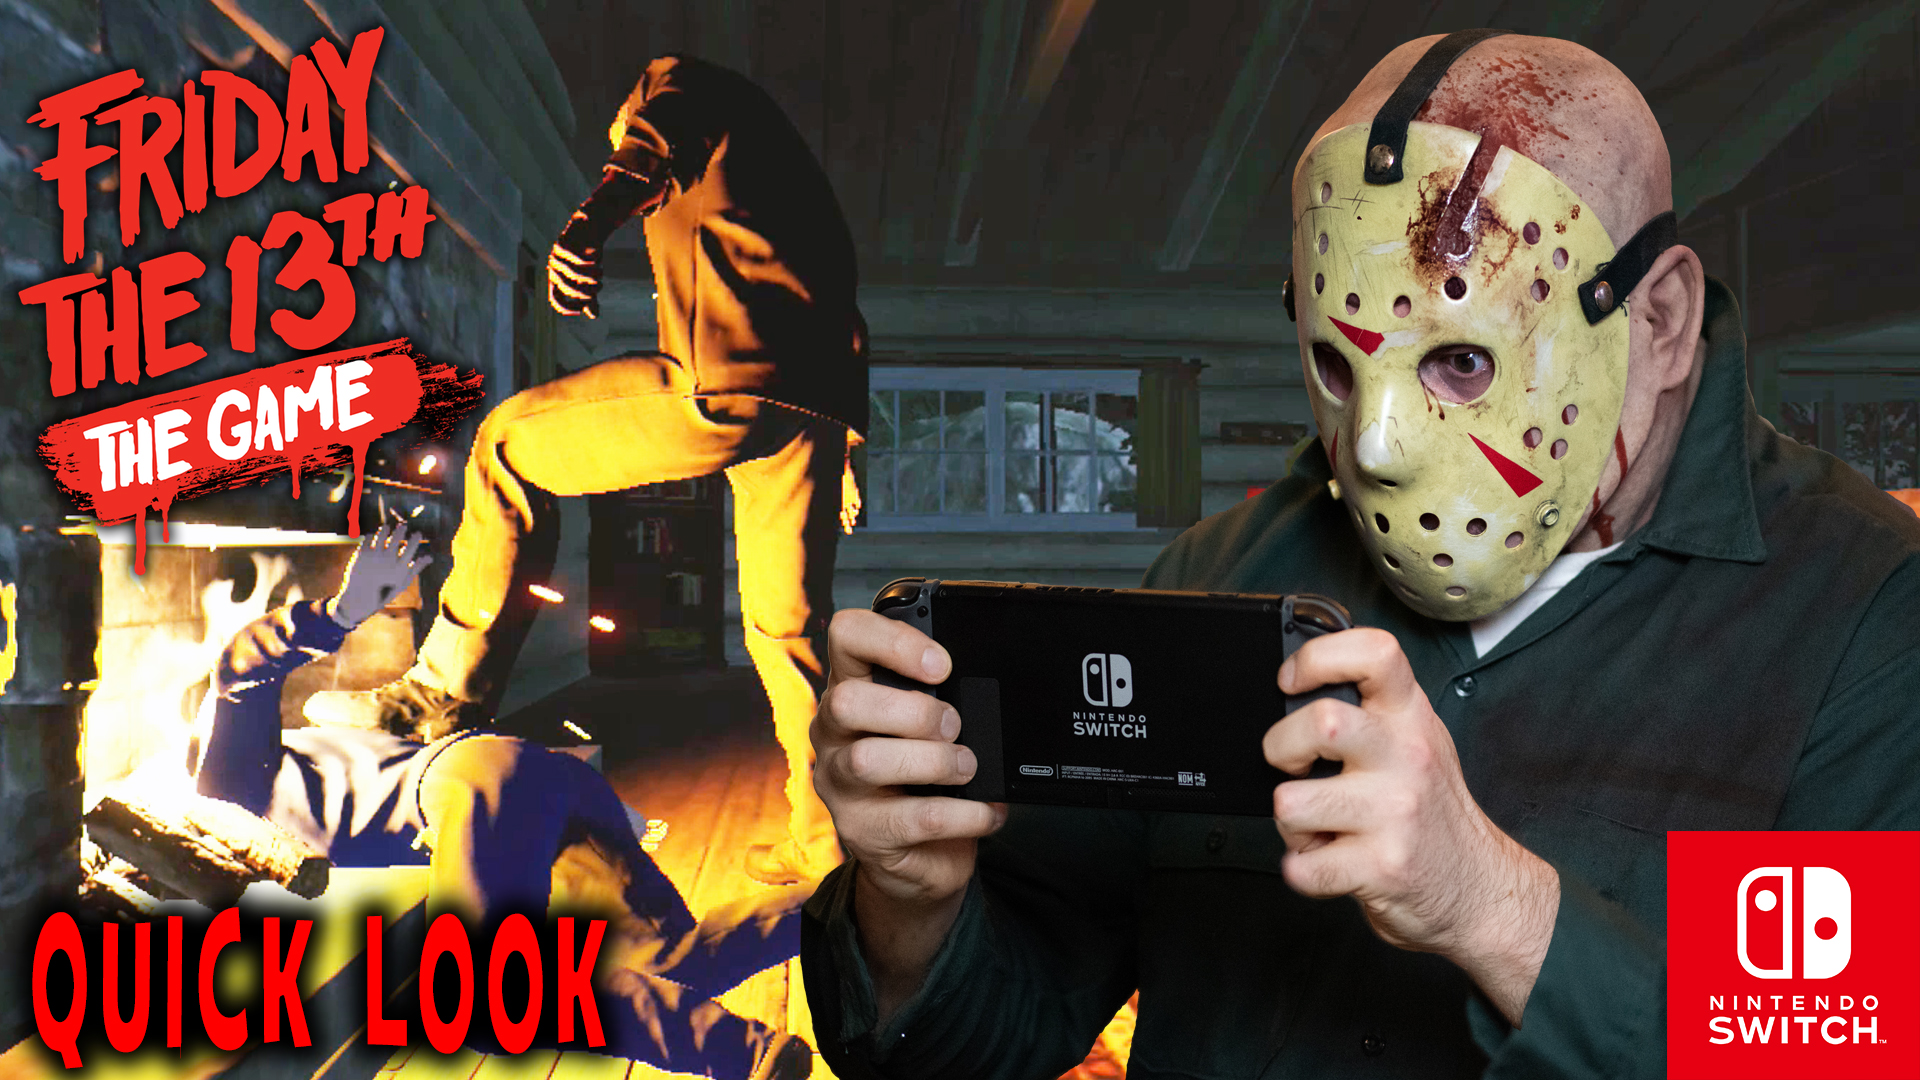 friday-the-13th-game-switch-review-quick-look-lord-kayoss-jason-voorhees-cosplay